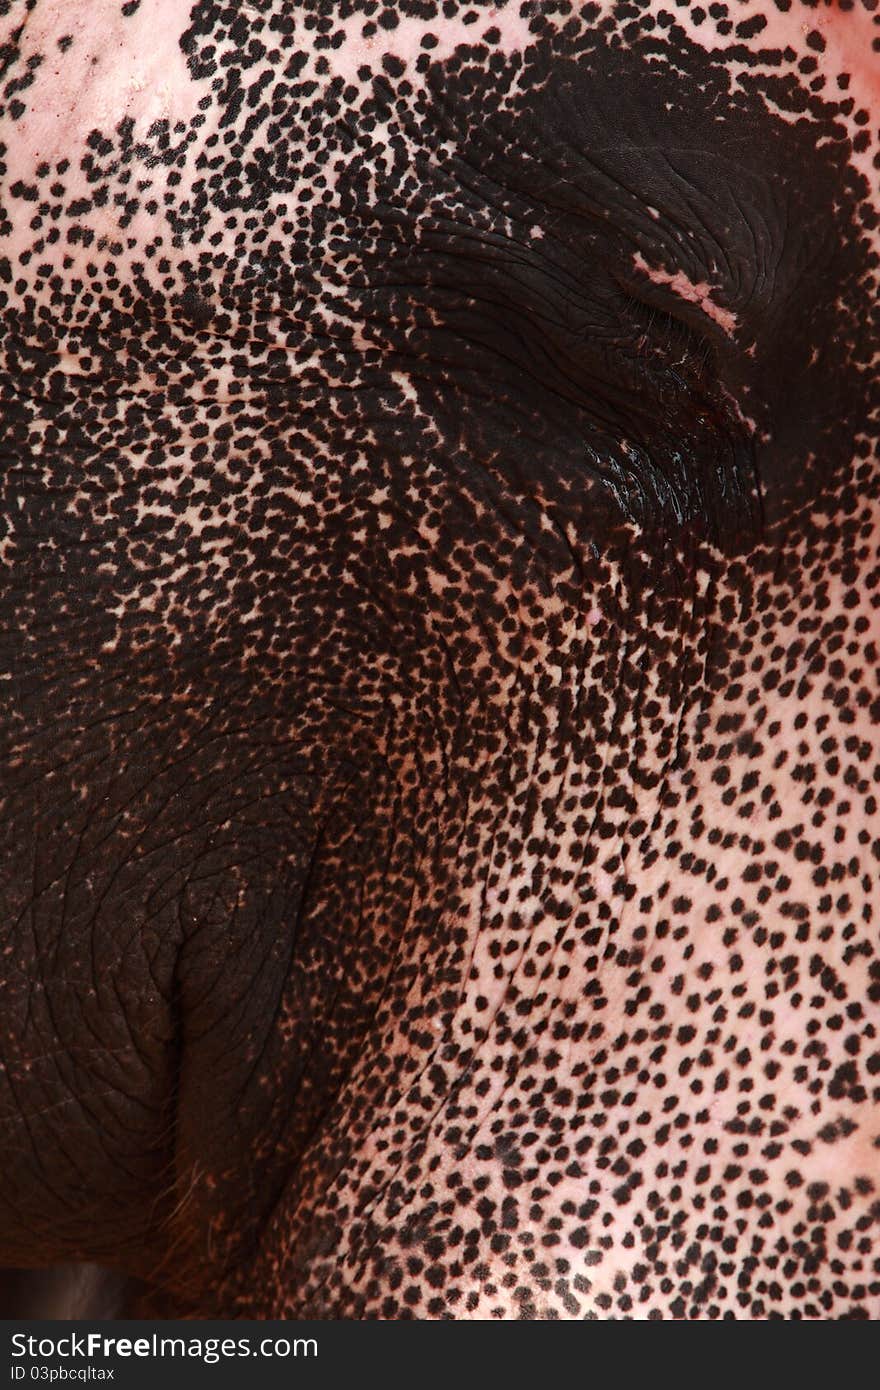 Close up of an elephant 's face with  moist eyes. Close up of an elephant 's face with  moist eyes